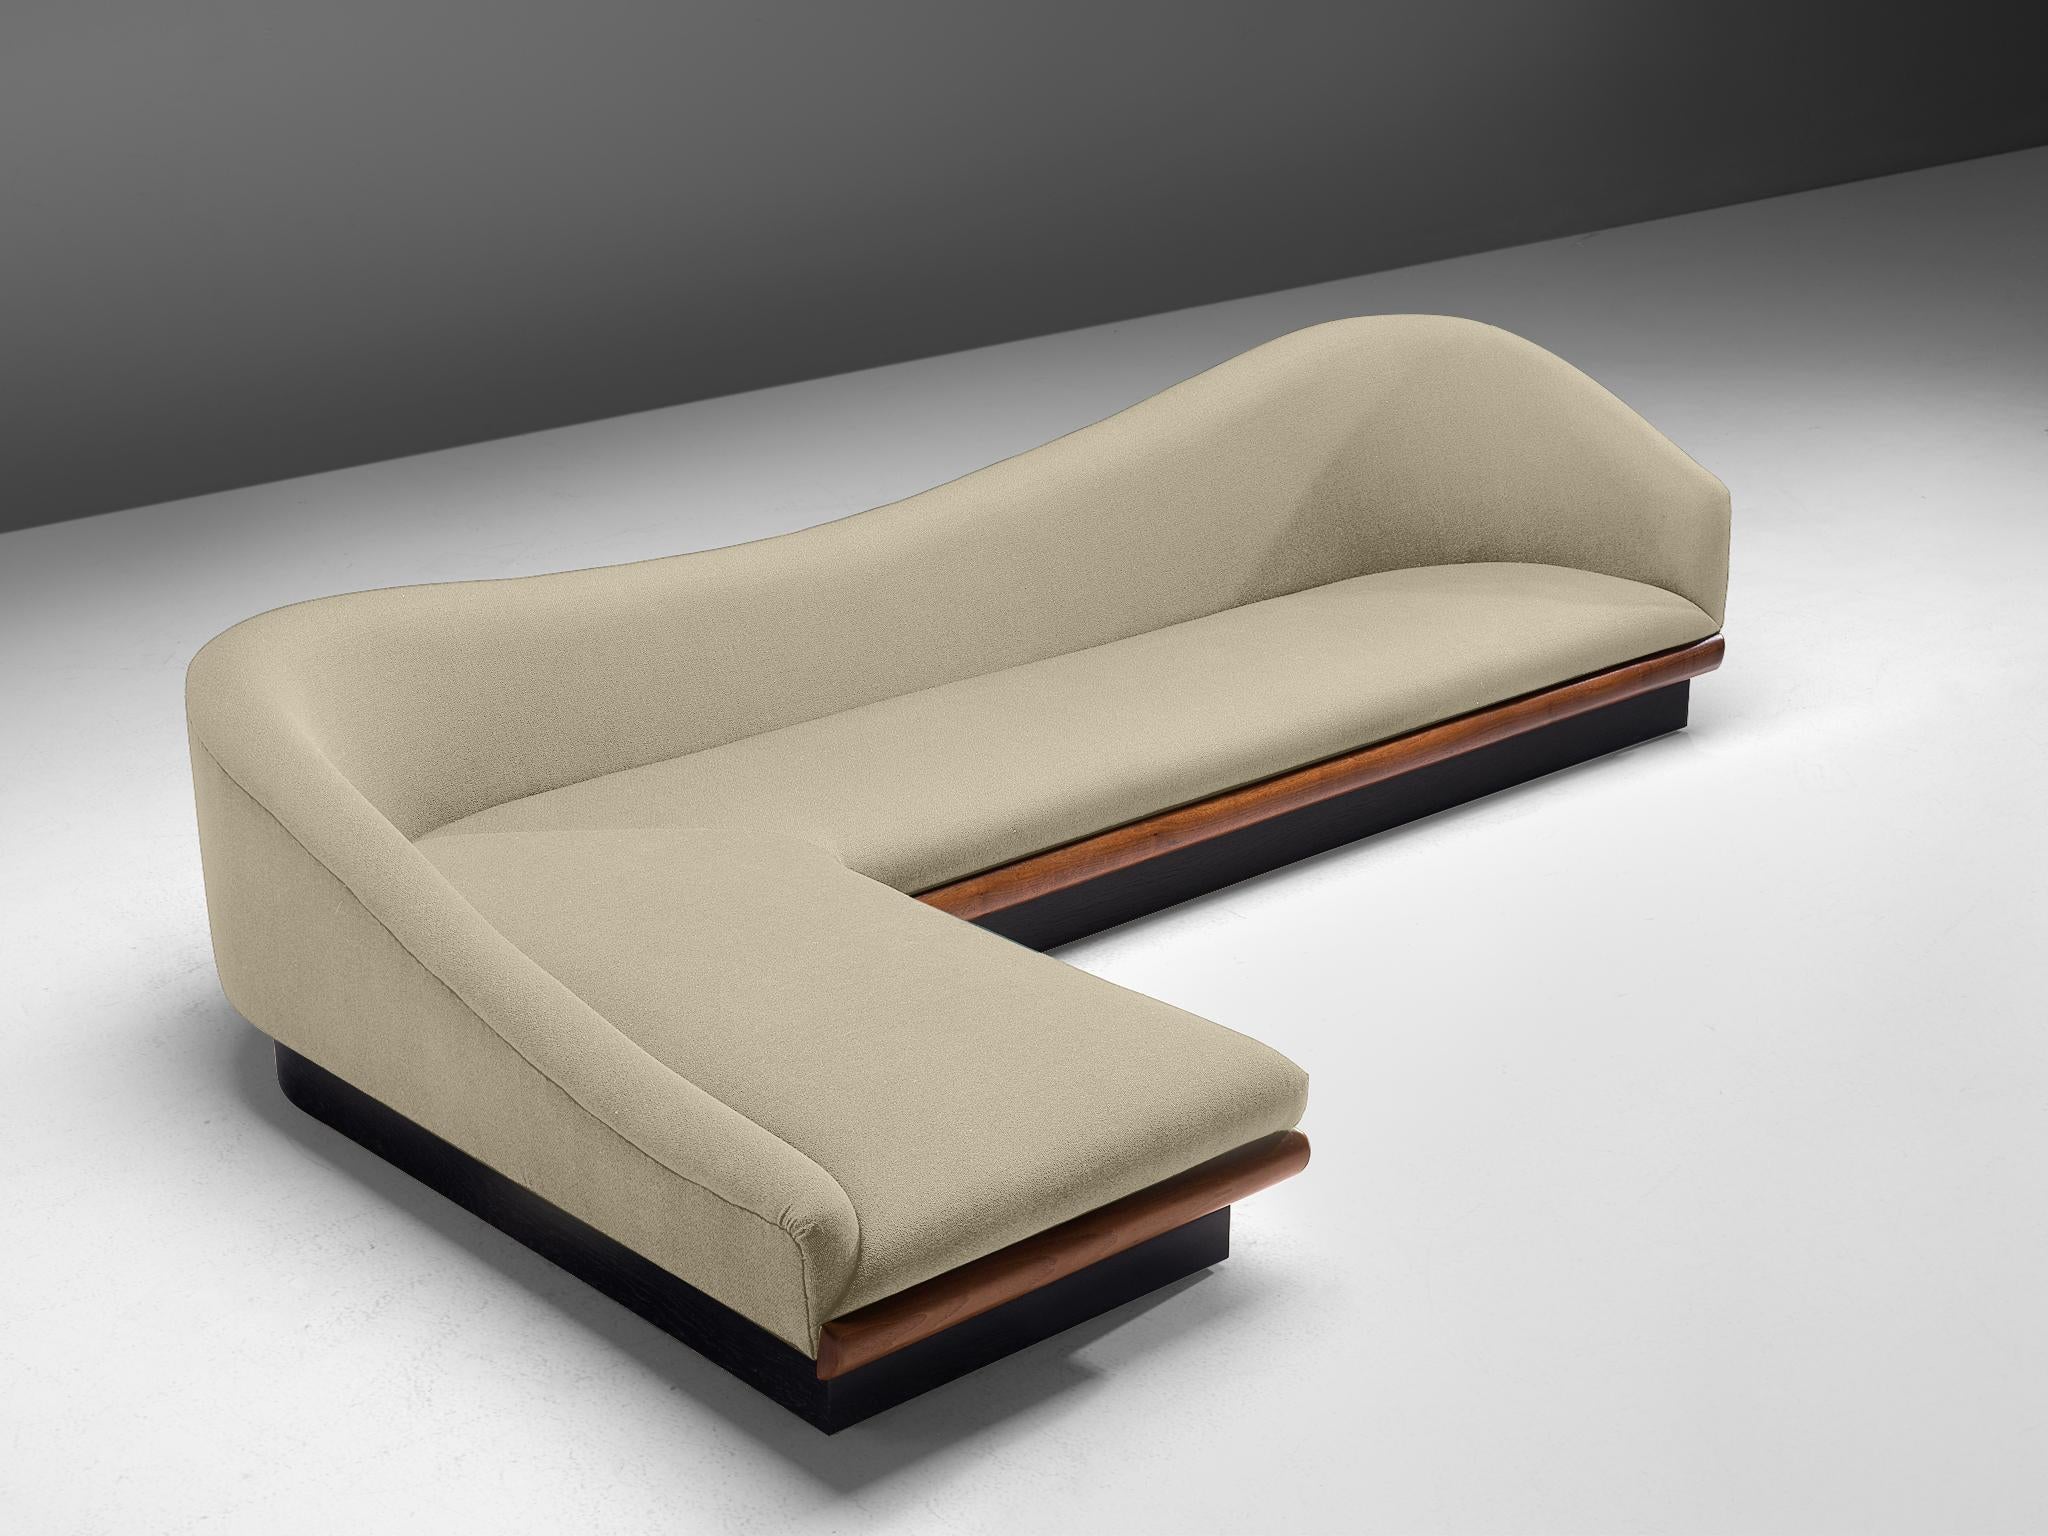 Adrian Pearsall, 'Cloud' sofa, walnut, upholstery, United States, 1950s

This cloud sofa has a modern shape, and sinuous lines which create a comfortable and appealing look. The L-shaped sofa is a great addition to a living area or dining area,